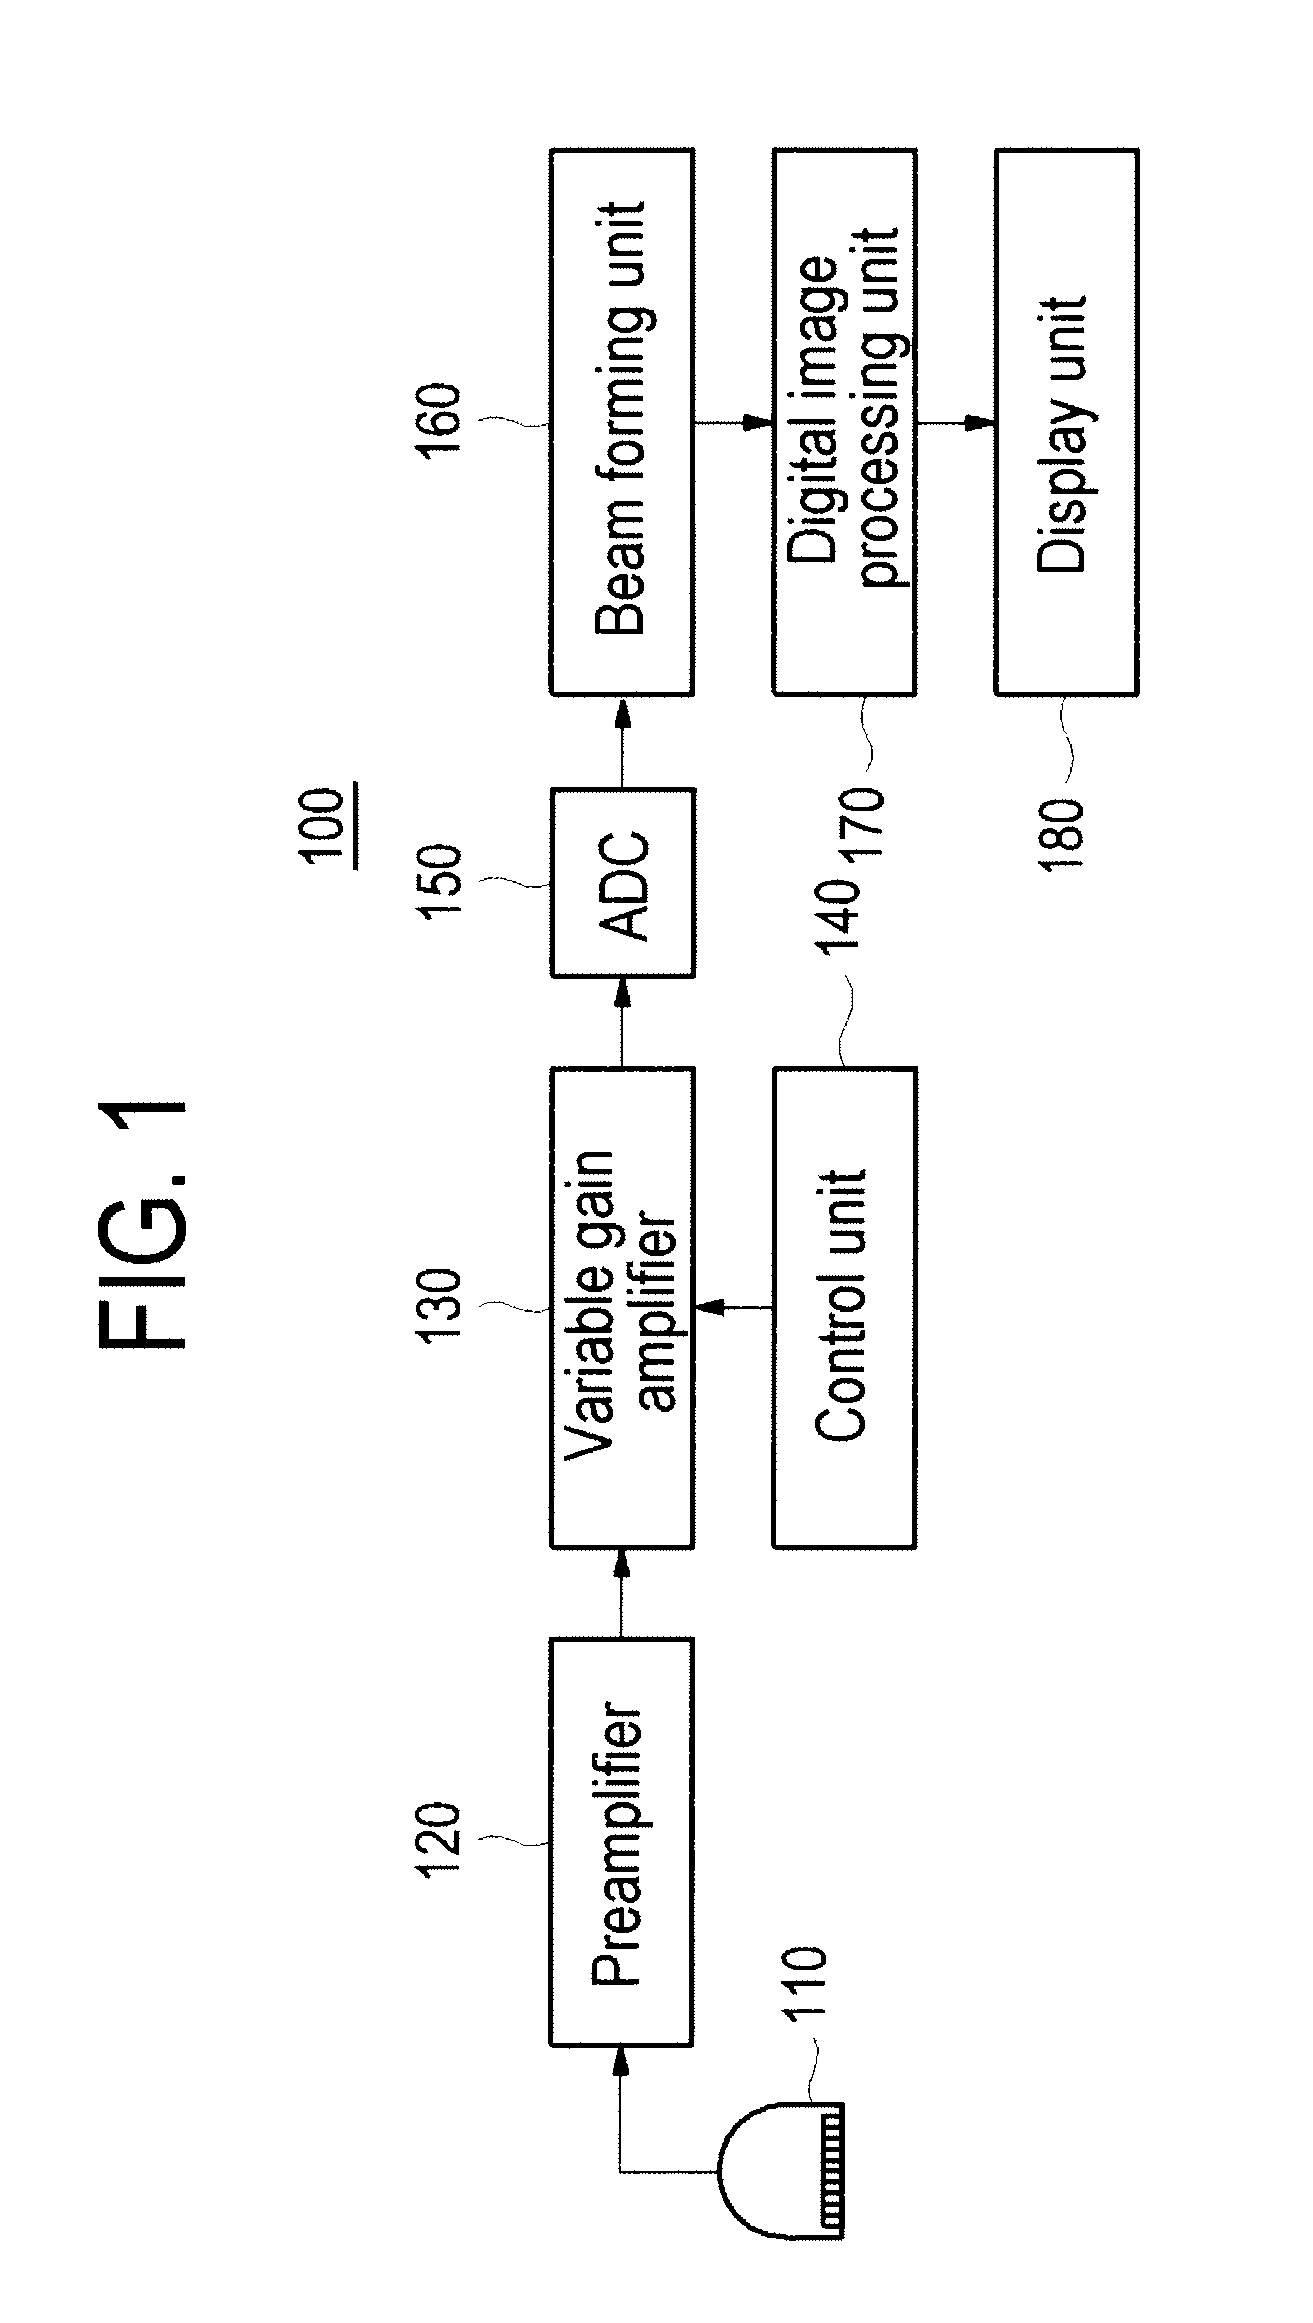 Wideband Variable Gain Amplifier With Clipping Function